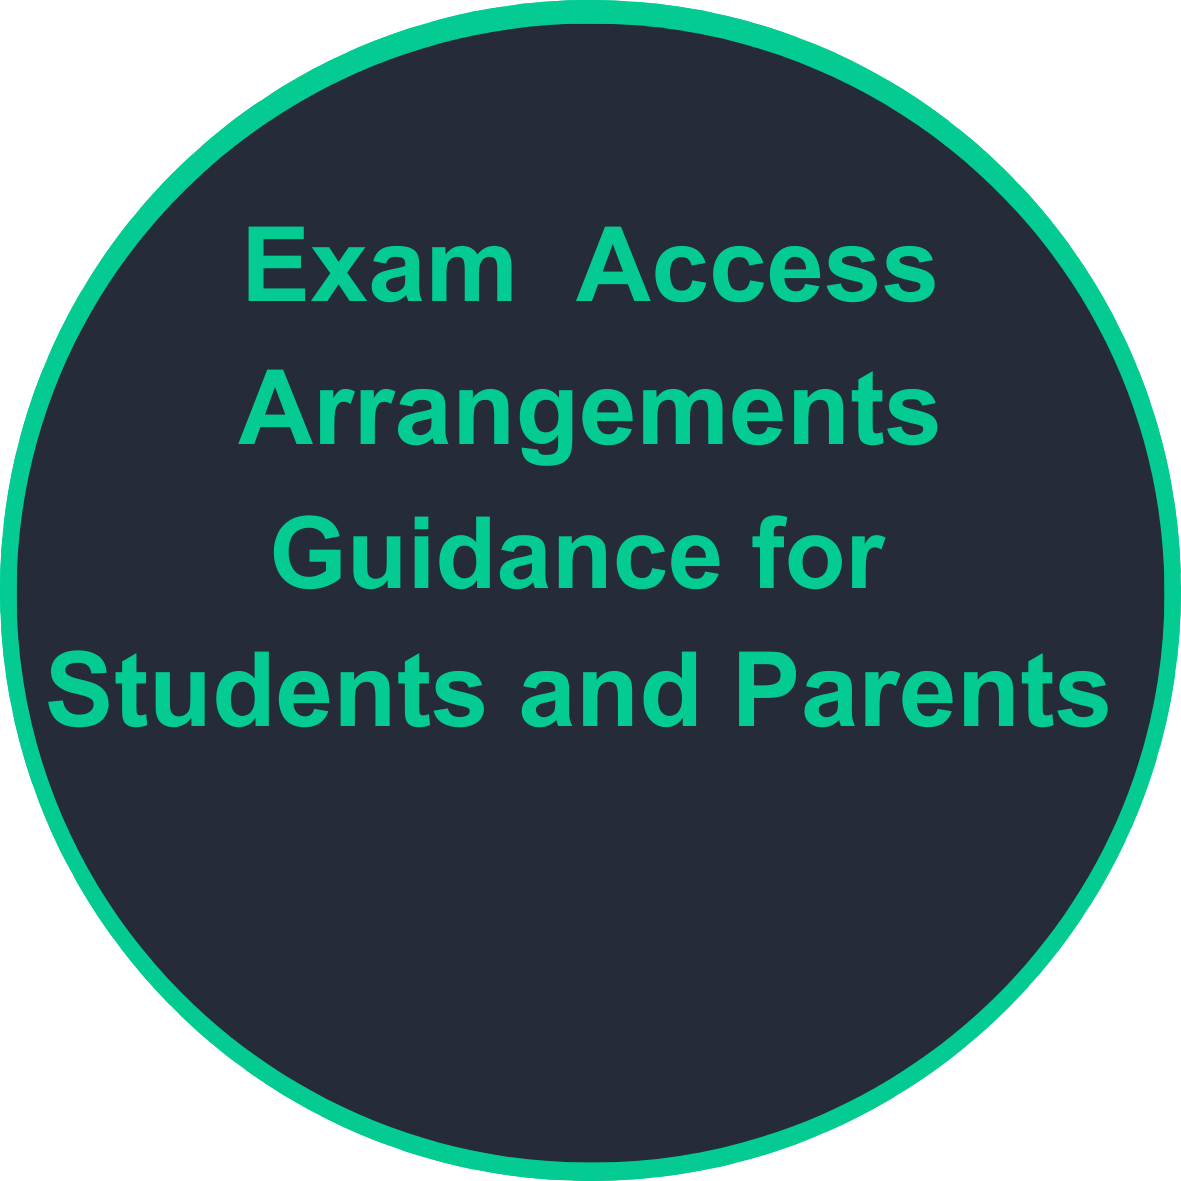 Guidance for students and parents around exam access arrangements”.